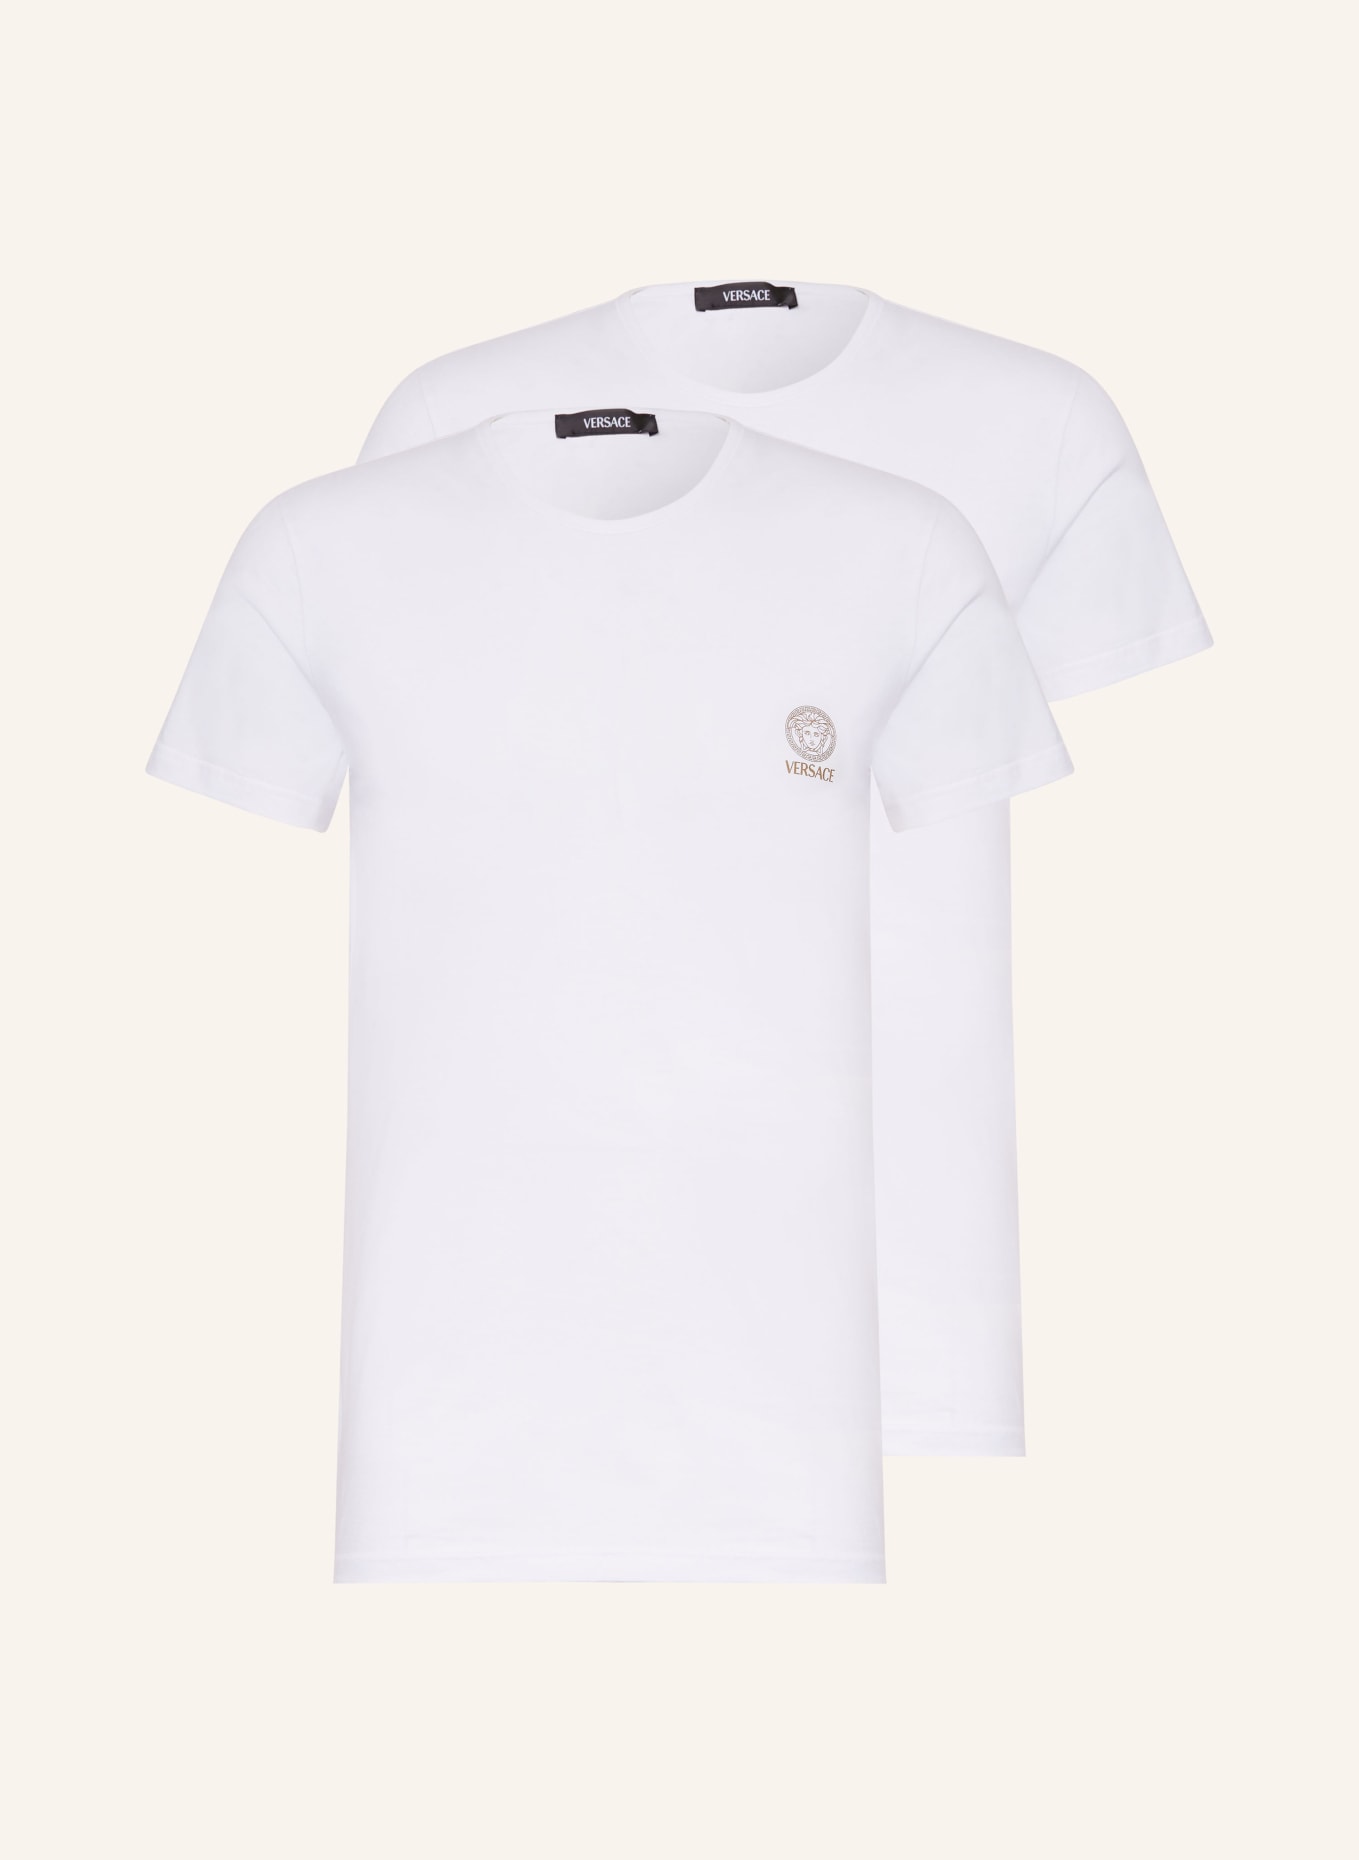 VERSACE 2-pack T-shirts, Color: WHITE (Image 1)